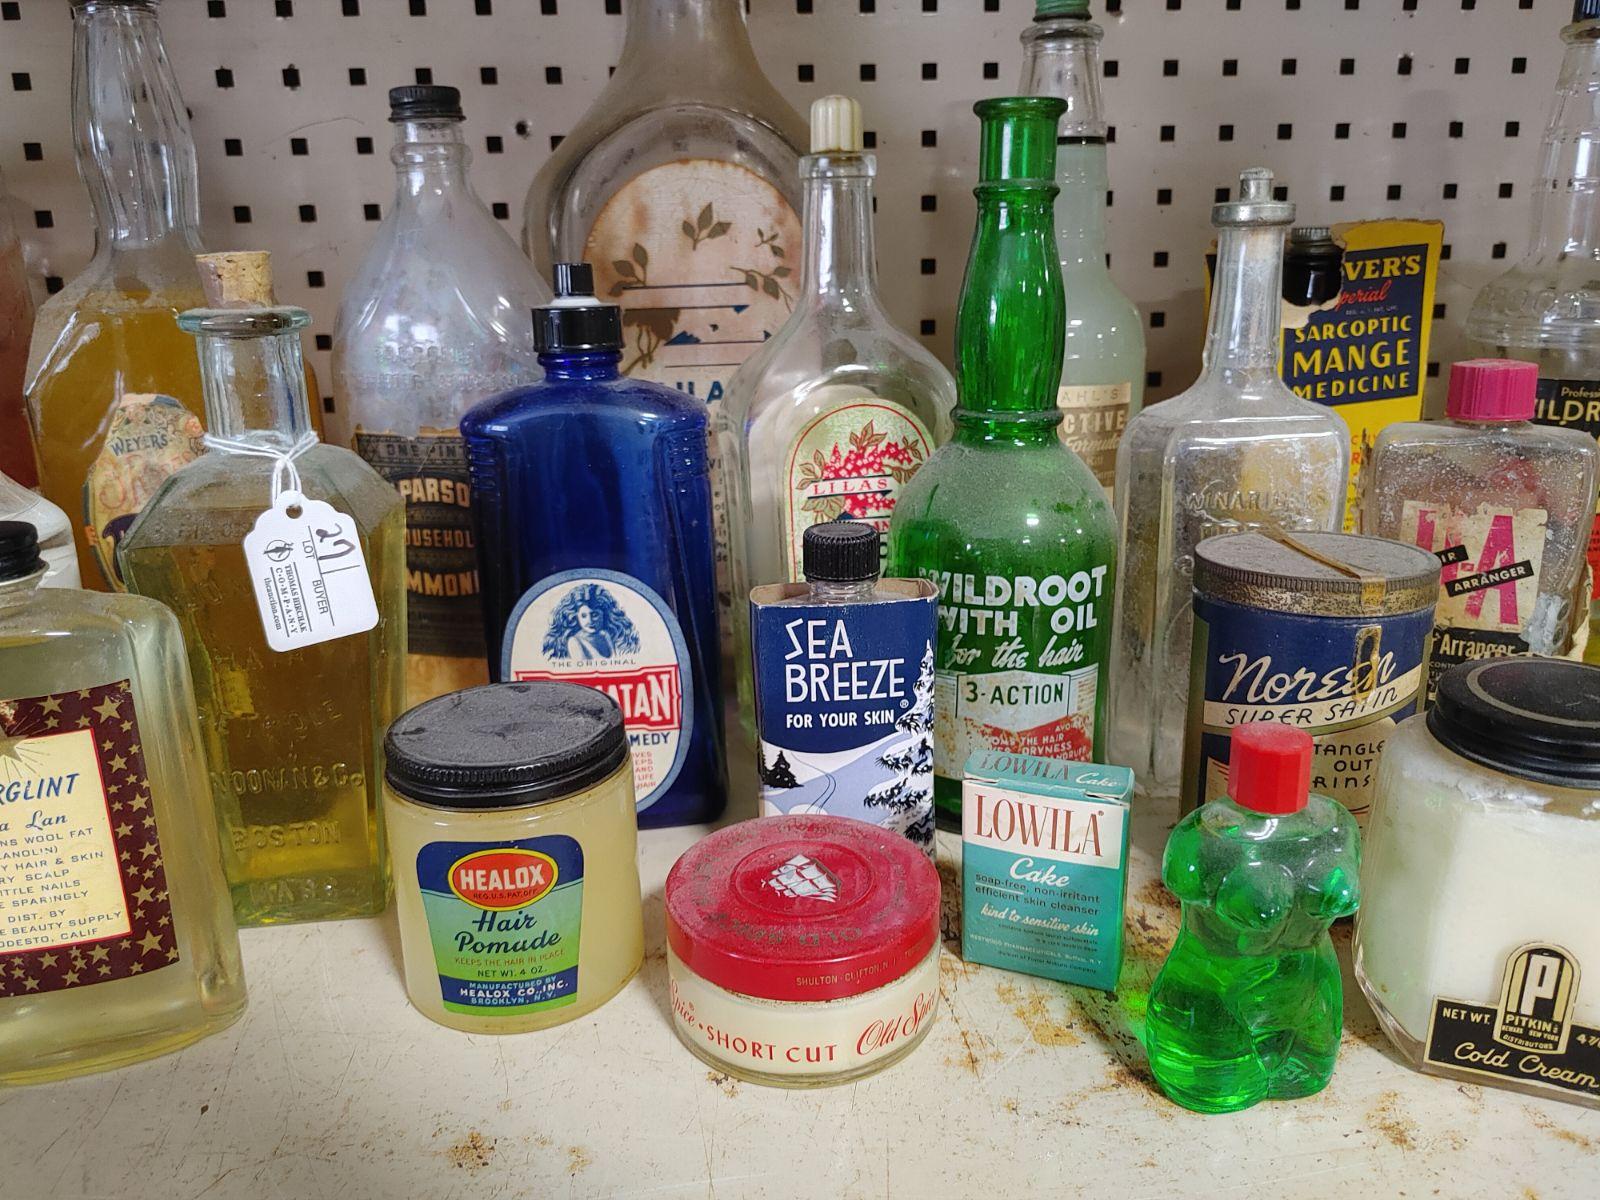 (50+/-) Vintage Barber Shop and Apothecary Advertising Bottles and Tins